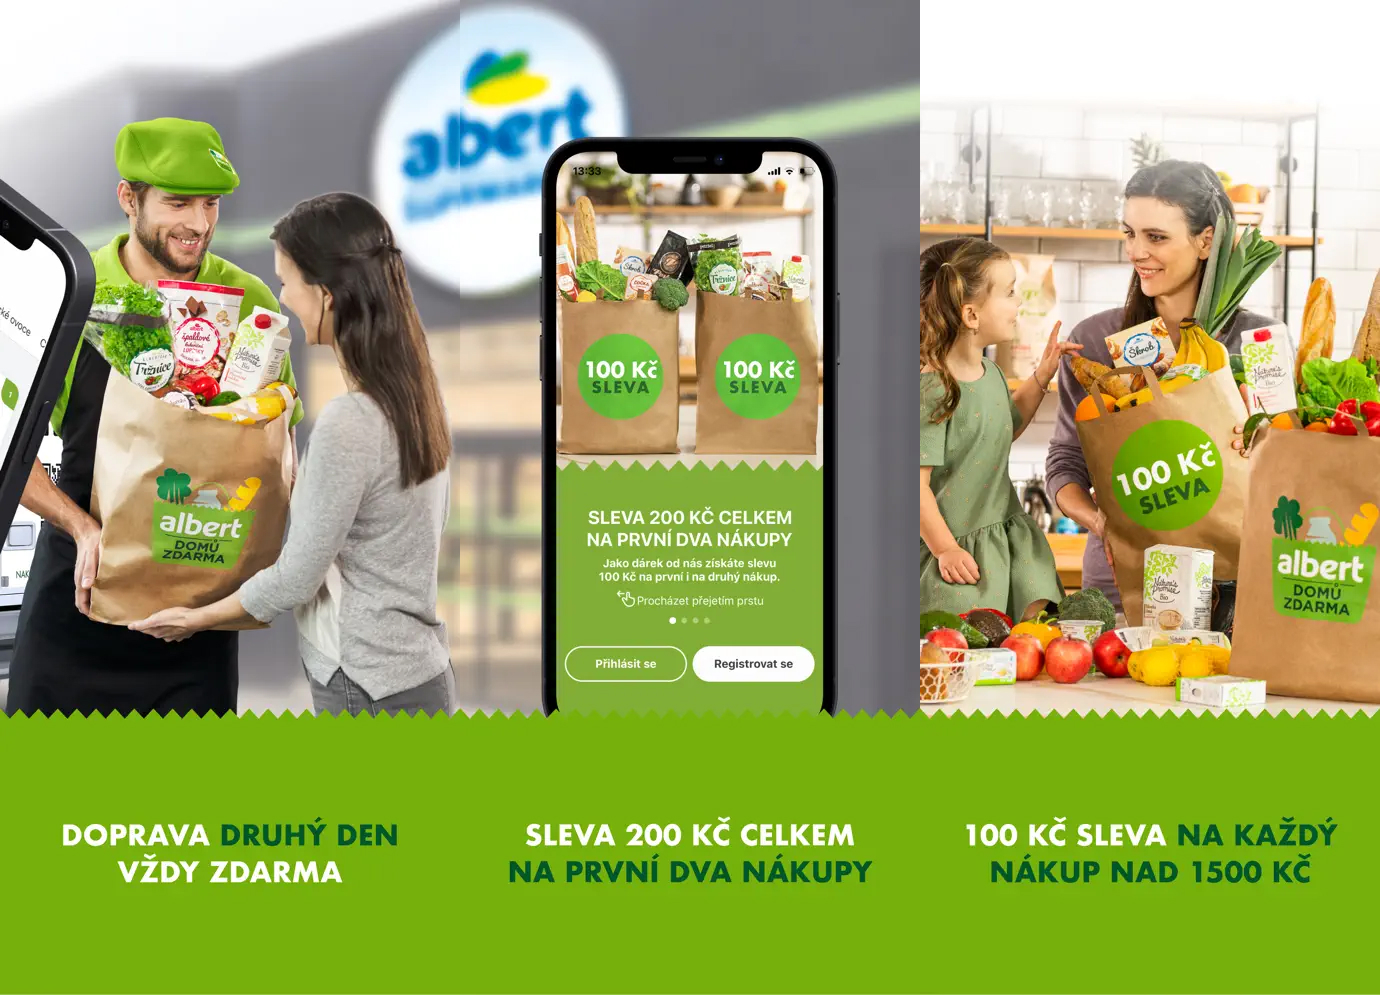 Albert Domów Zdarma — mobile application for an online food delivery store